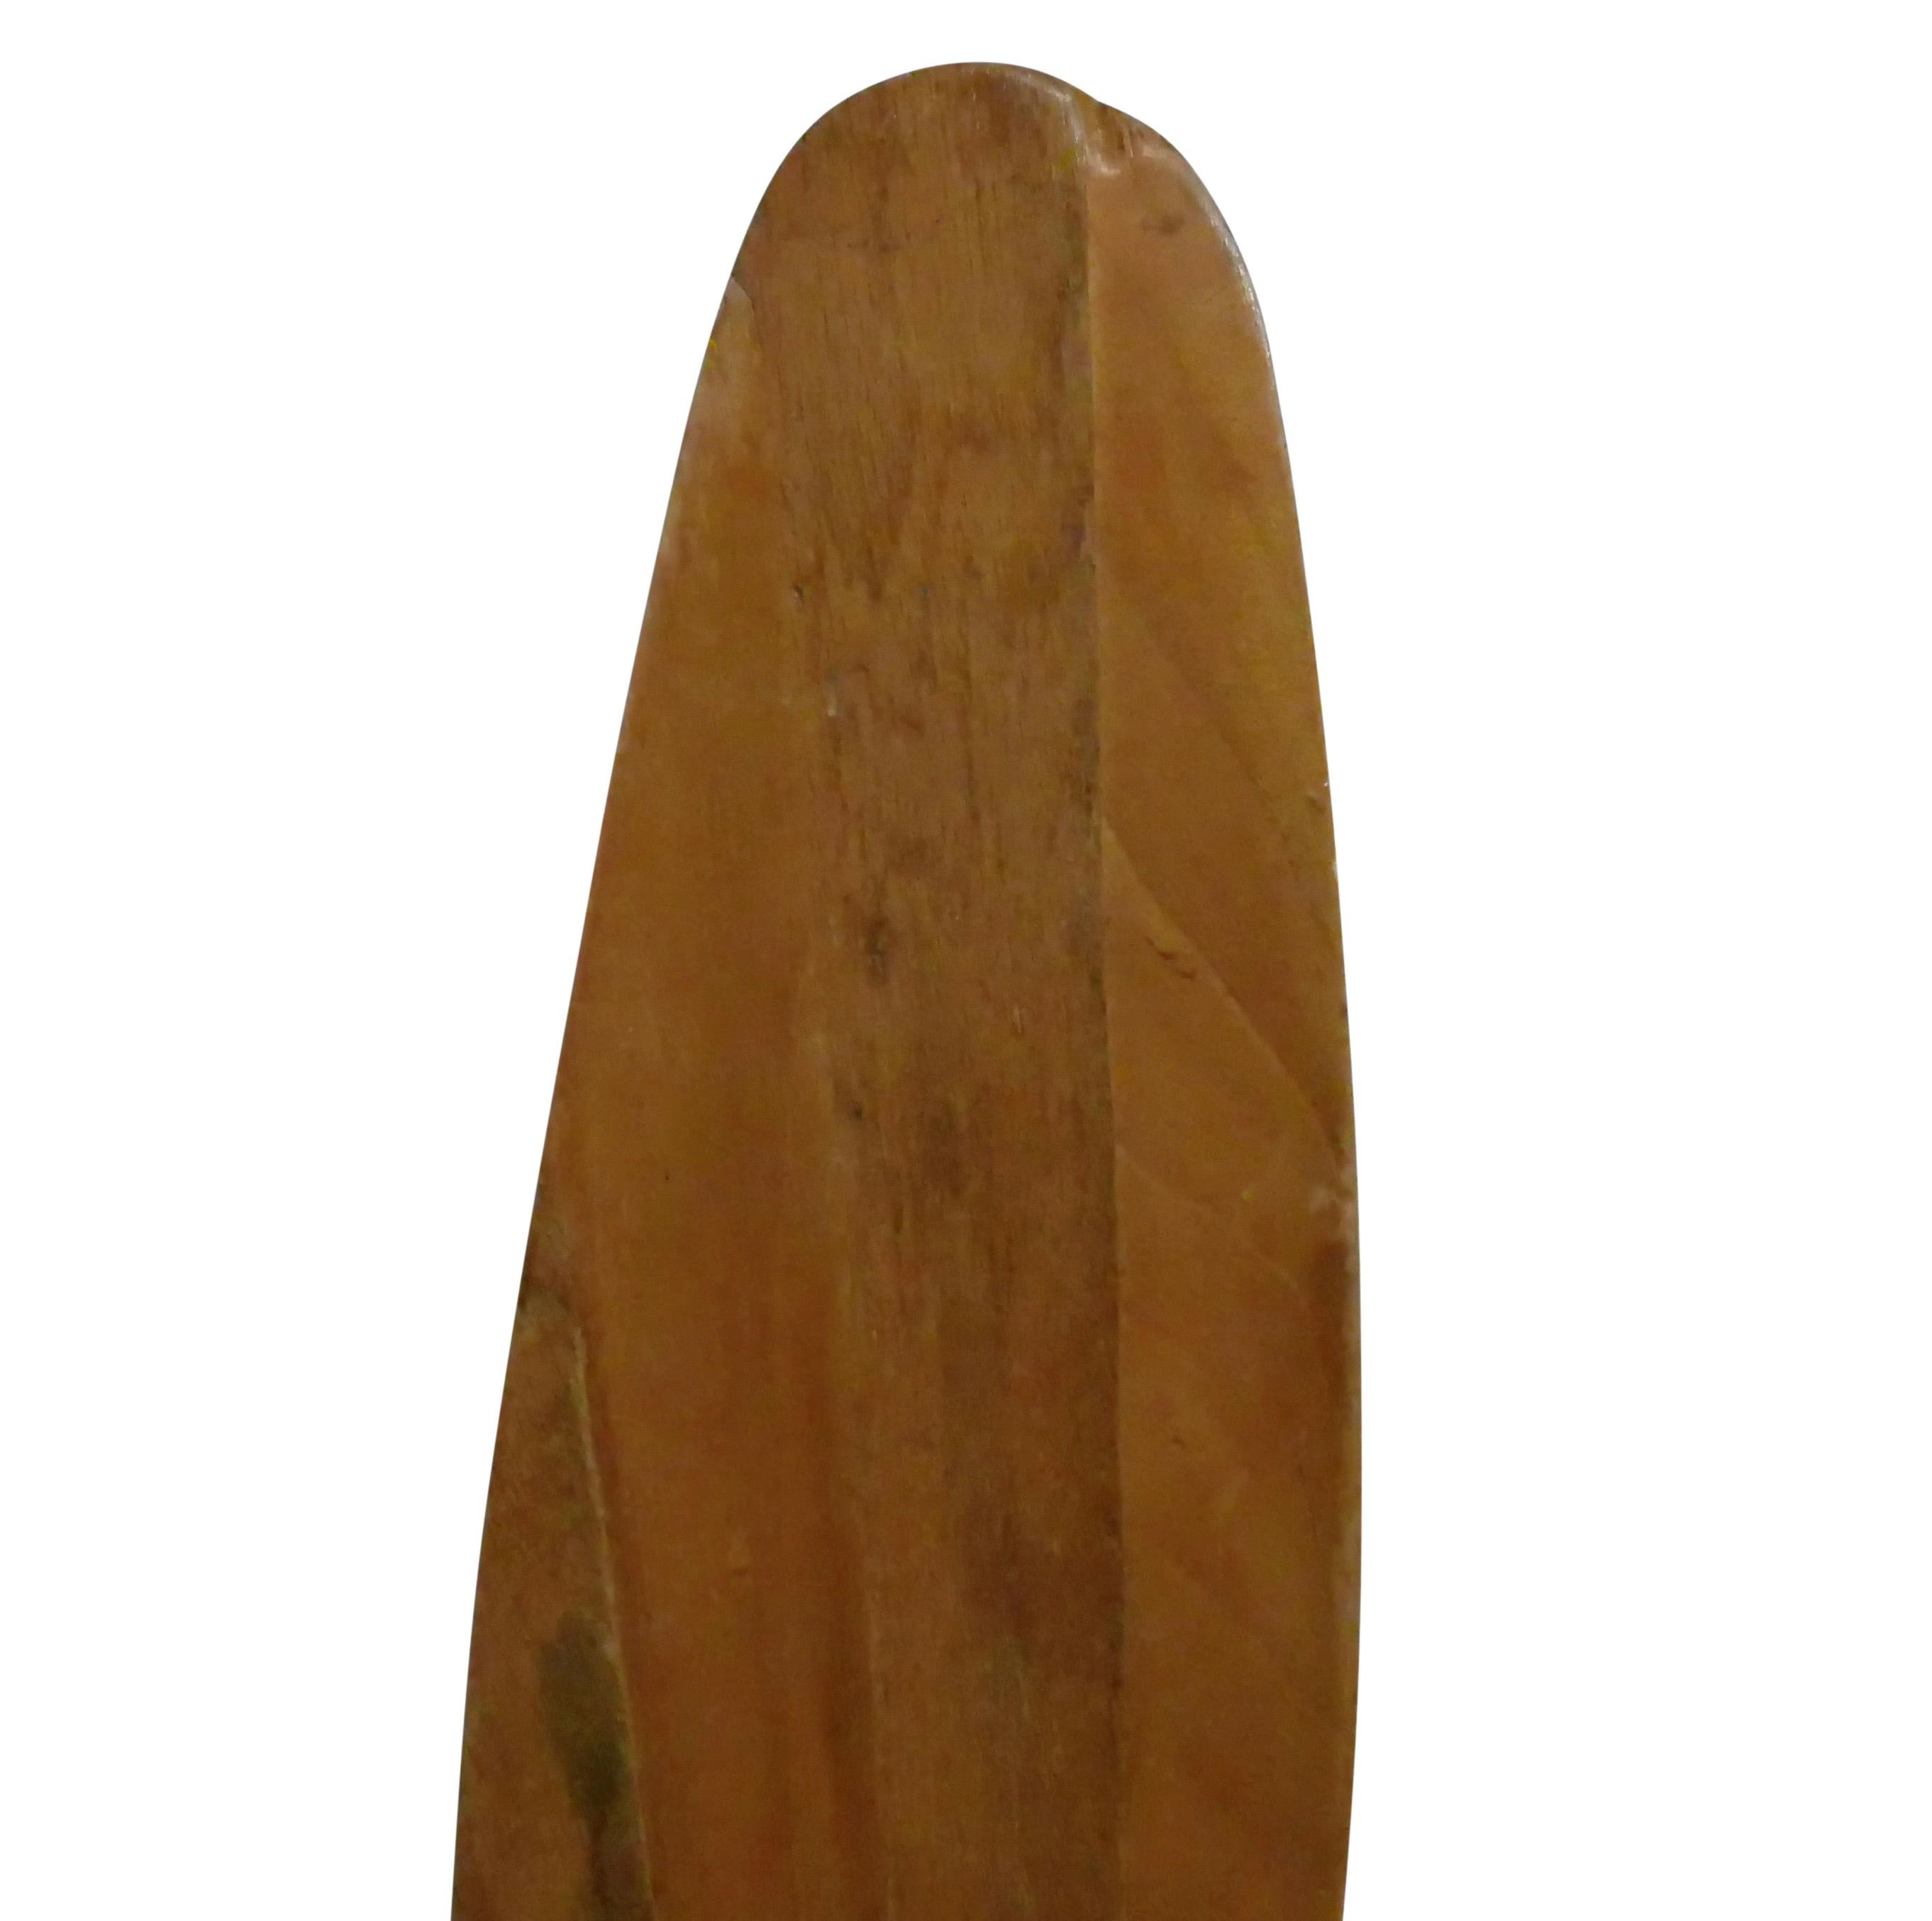 American Three Blade Wood Pattern Mold Propeller, Early 20th Century